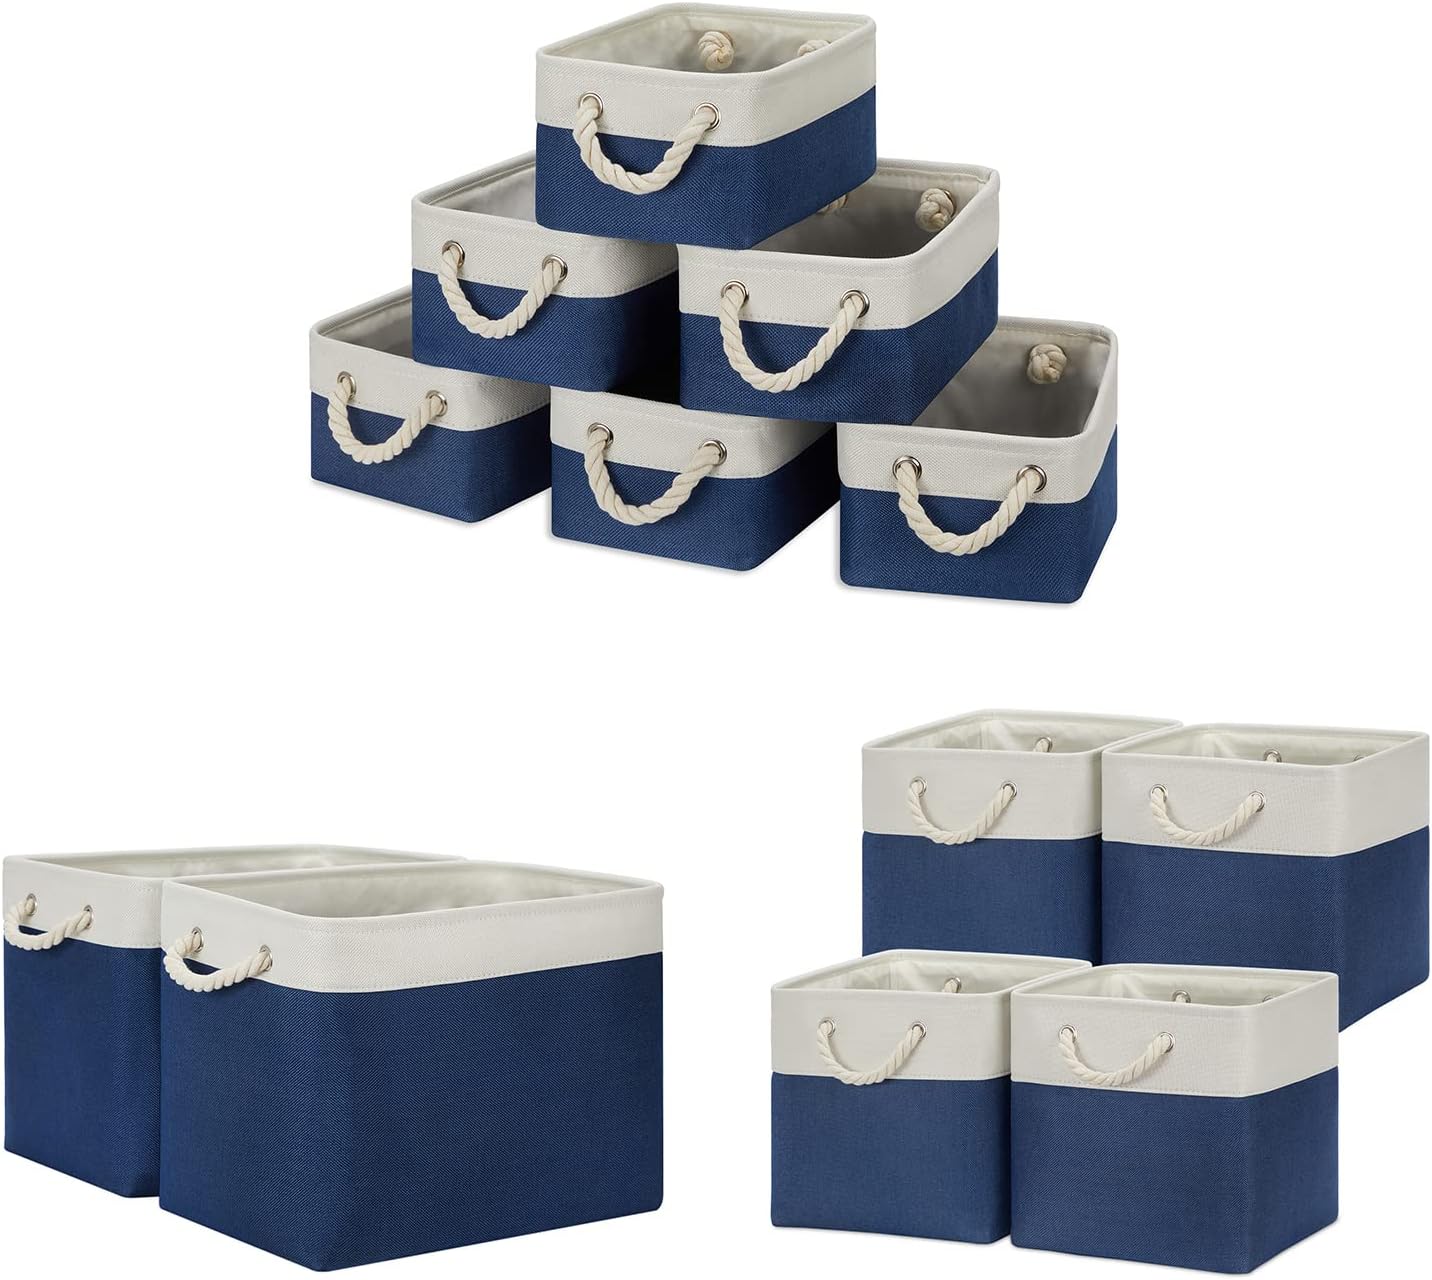 Temary Small Storage Baskets for Shelves, Fabric Storage Bins for Organizing Clothes, Toys, Books (White&Blue, 6Pack-11.8Lx7.9Wx5.3H , 2Pack-16Lx12Wx12H , 4Pack-12Lx12Wx12H )